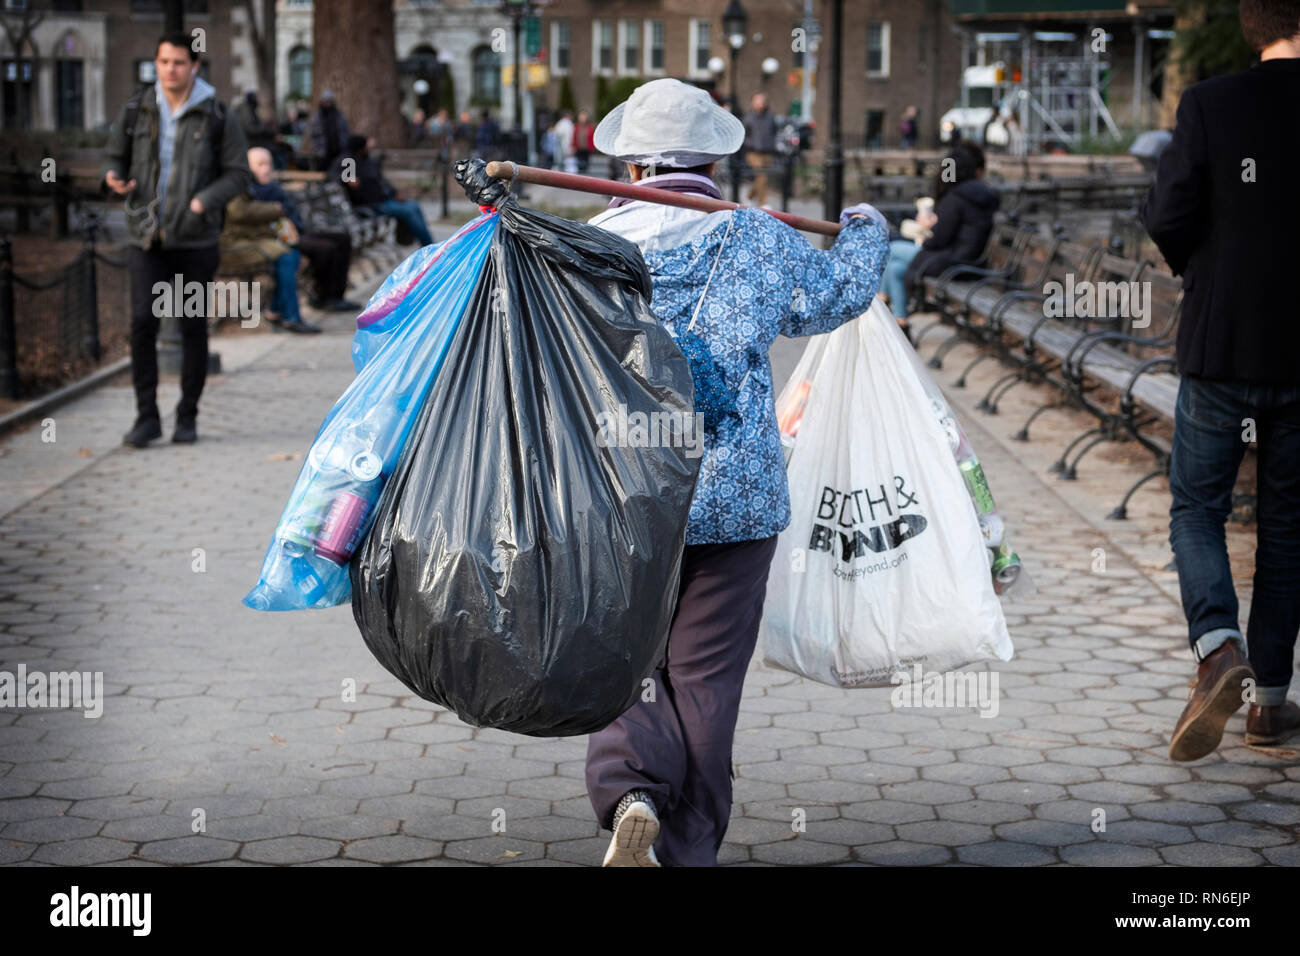 A middle aged Asian woman collecting deposit bottles in Greenwich Village, New York City. Stock Photo